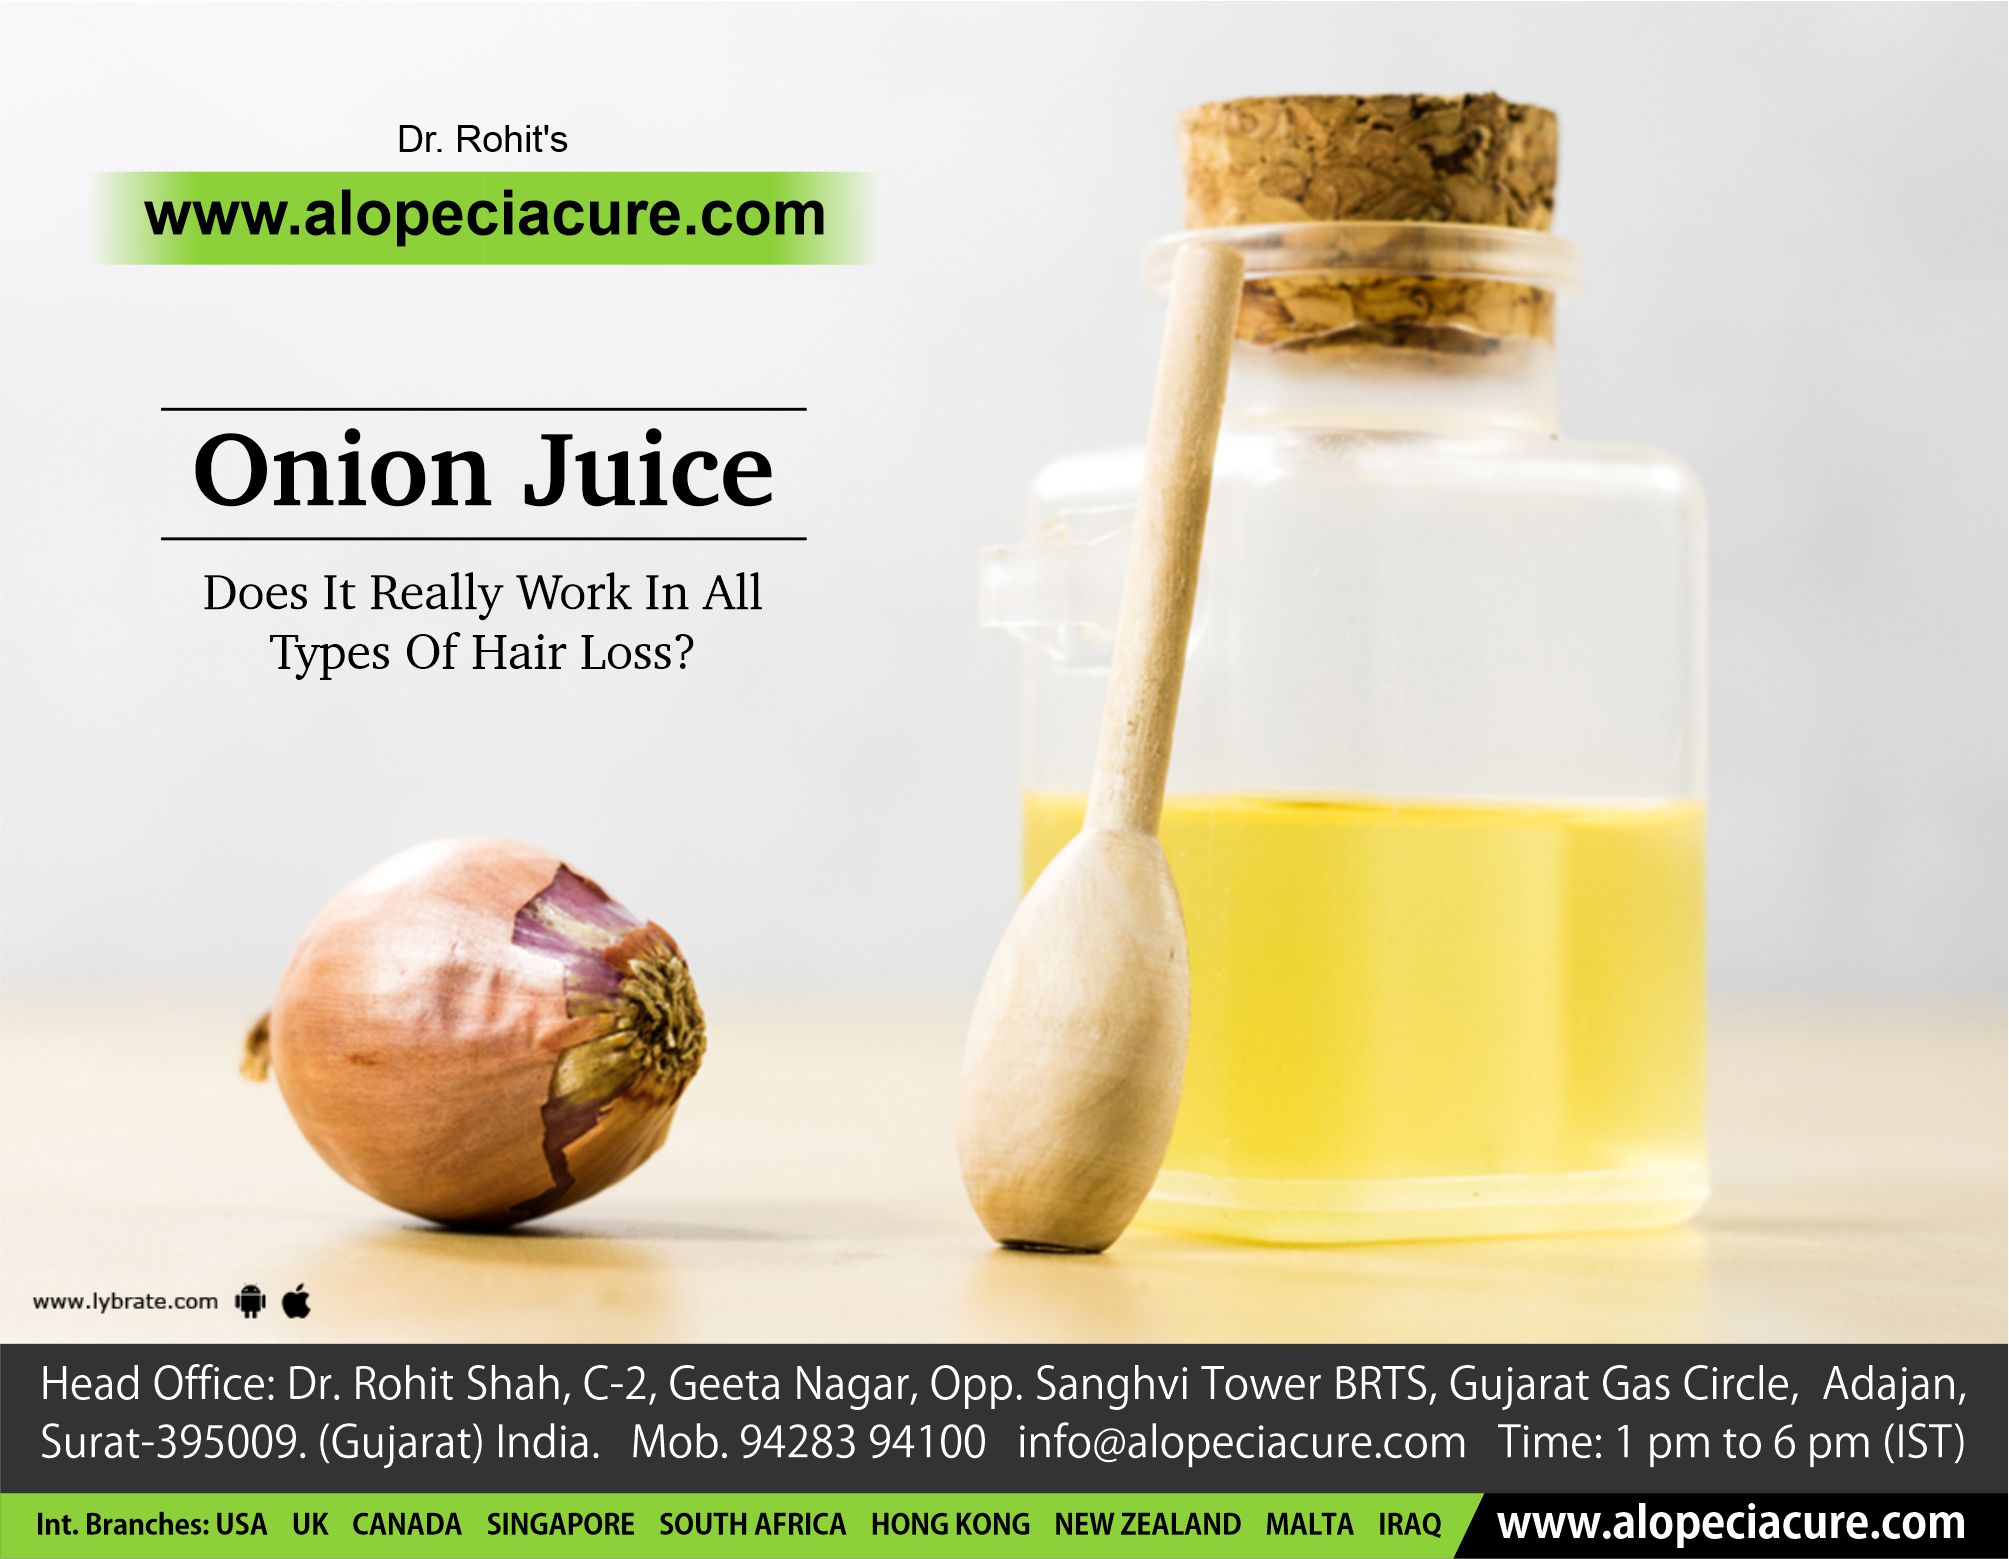 Onion Juice - Does It Really Work In All Types Of Hair Loss?